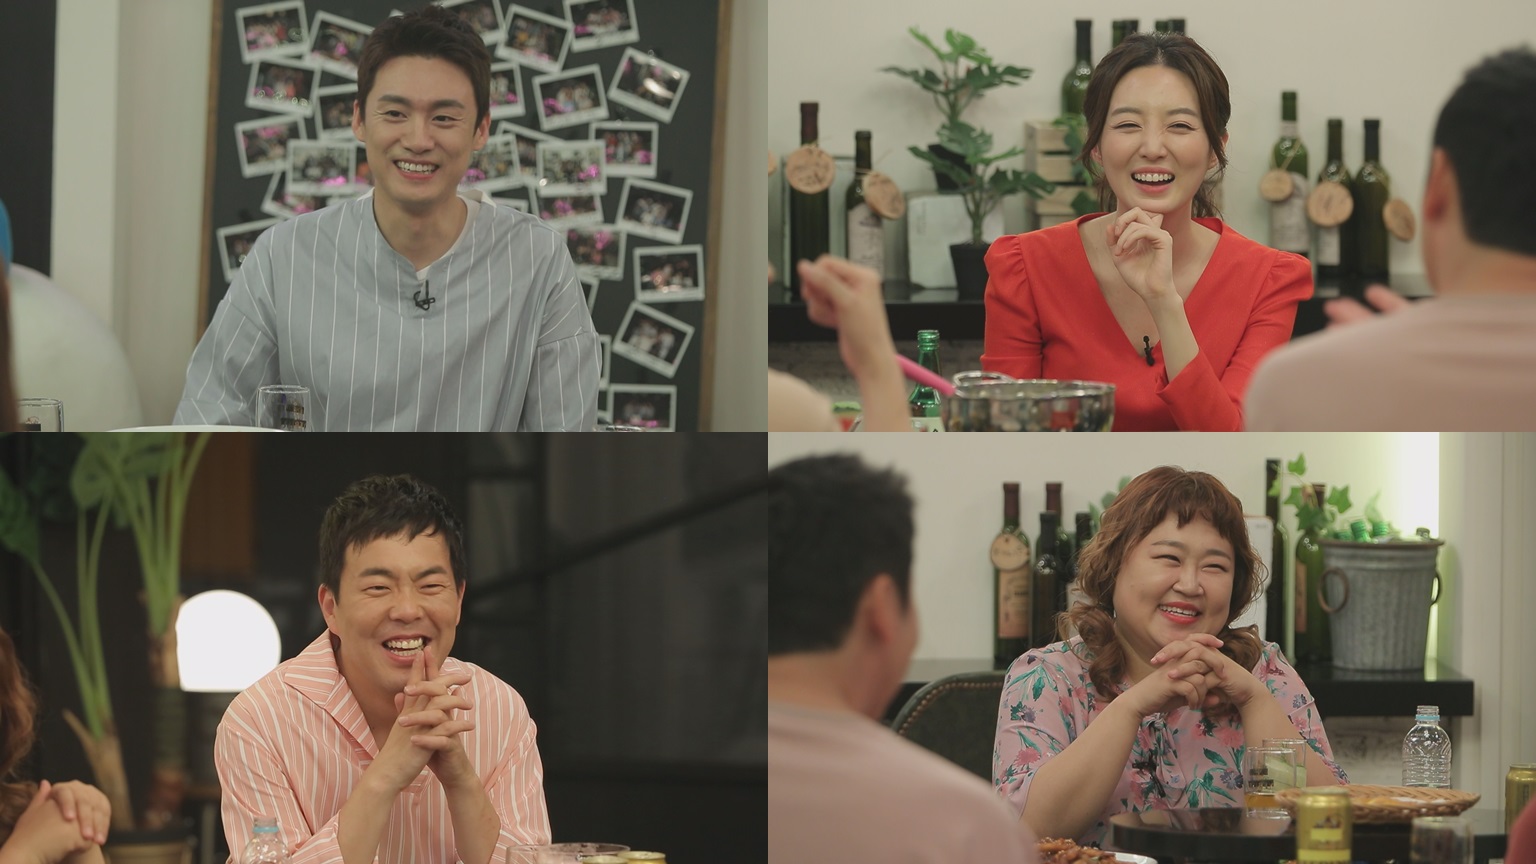 Life Bar Oh Sang-jin released an episode of his wife Kim So-young, a group BTS fan.TVNs NEW Life Bar, which will air at 11 p.m. on the 23rd, will be attended by a couple of lovebirds such as Oh Sang-jin Kim So-young, a couple of married couples second year announcer, and Kim Min-ki Hong Yoon Hwa, a comedian of the 9th year of dating.Oh Sang-jin reveals that there is another man in his wifes mind and focuses attention on what she said about his wife Kim So-young being a big fan of idol group BTS.One day I opened the box and I had a CD.When I saw why this was here, it was a sign CD with Kim So-young sister. Kim So-young is a shy Confessions BTS Jungkook fan and Oh Sang-jin is the back door of jealousy.Kim So-young has released her first meeting episode with husband Oh Sang-jin.She said, When I was a probationary announcer, my husband was in charge of it. I was 7 to 8 years old, but I did not think I could love someone who is this age difference.I thought it was the real Man from Nowhere. After leaving, I ate rice together and asked the question, Are you popular? And I thought, The Man from Nowhere asks a strange question.My husband thought that love had started since then, and we still dont know when it is one day. He laughed at the funny episode.Kim Min-ki and Hong Yoon Hwa, who are about to marry in November, show off their extraordinary love affair.Kim Min-ki surprised everyone by revealing that he greeted Hong Yoon Hwas house nine days after meeting Hong Yoon Hwa.Kim Min-ki showed a reliable appearance by introducing himself to a mother who would worry about Hong Yoon Hwa who was traced, and Hong Yoon Hwas mother also showed confidence in Kim Min-kis appearance.Especially recently, Kim Min-kis long-standing ideal type has revealed the story of the story.Kim Min-ki, an actress Lee Na-youngs long-time ideal, told Hong Yoon Hwa that he was Na Youngs first and Yoon Hwas second in a joke. Hong Yoon Hwa said, I did not laugh because I was twisted.The two love stories of the two people who make the viewer smile can be confirmed on the broadcast on this day.NEW Life Bar is broadcast every Thursday at 11 p.m.